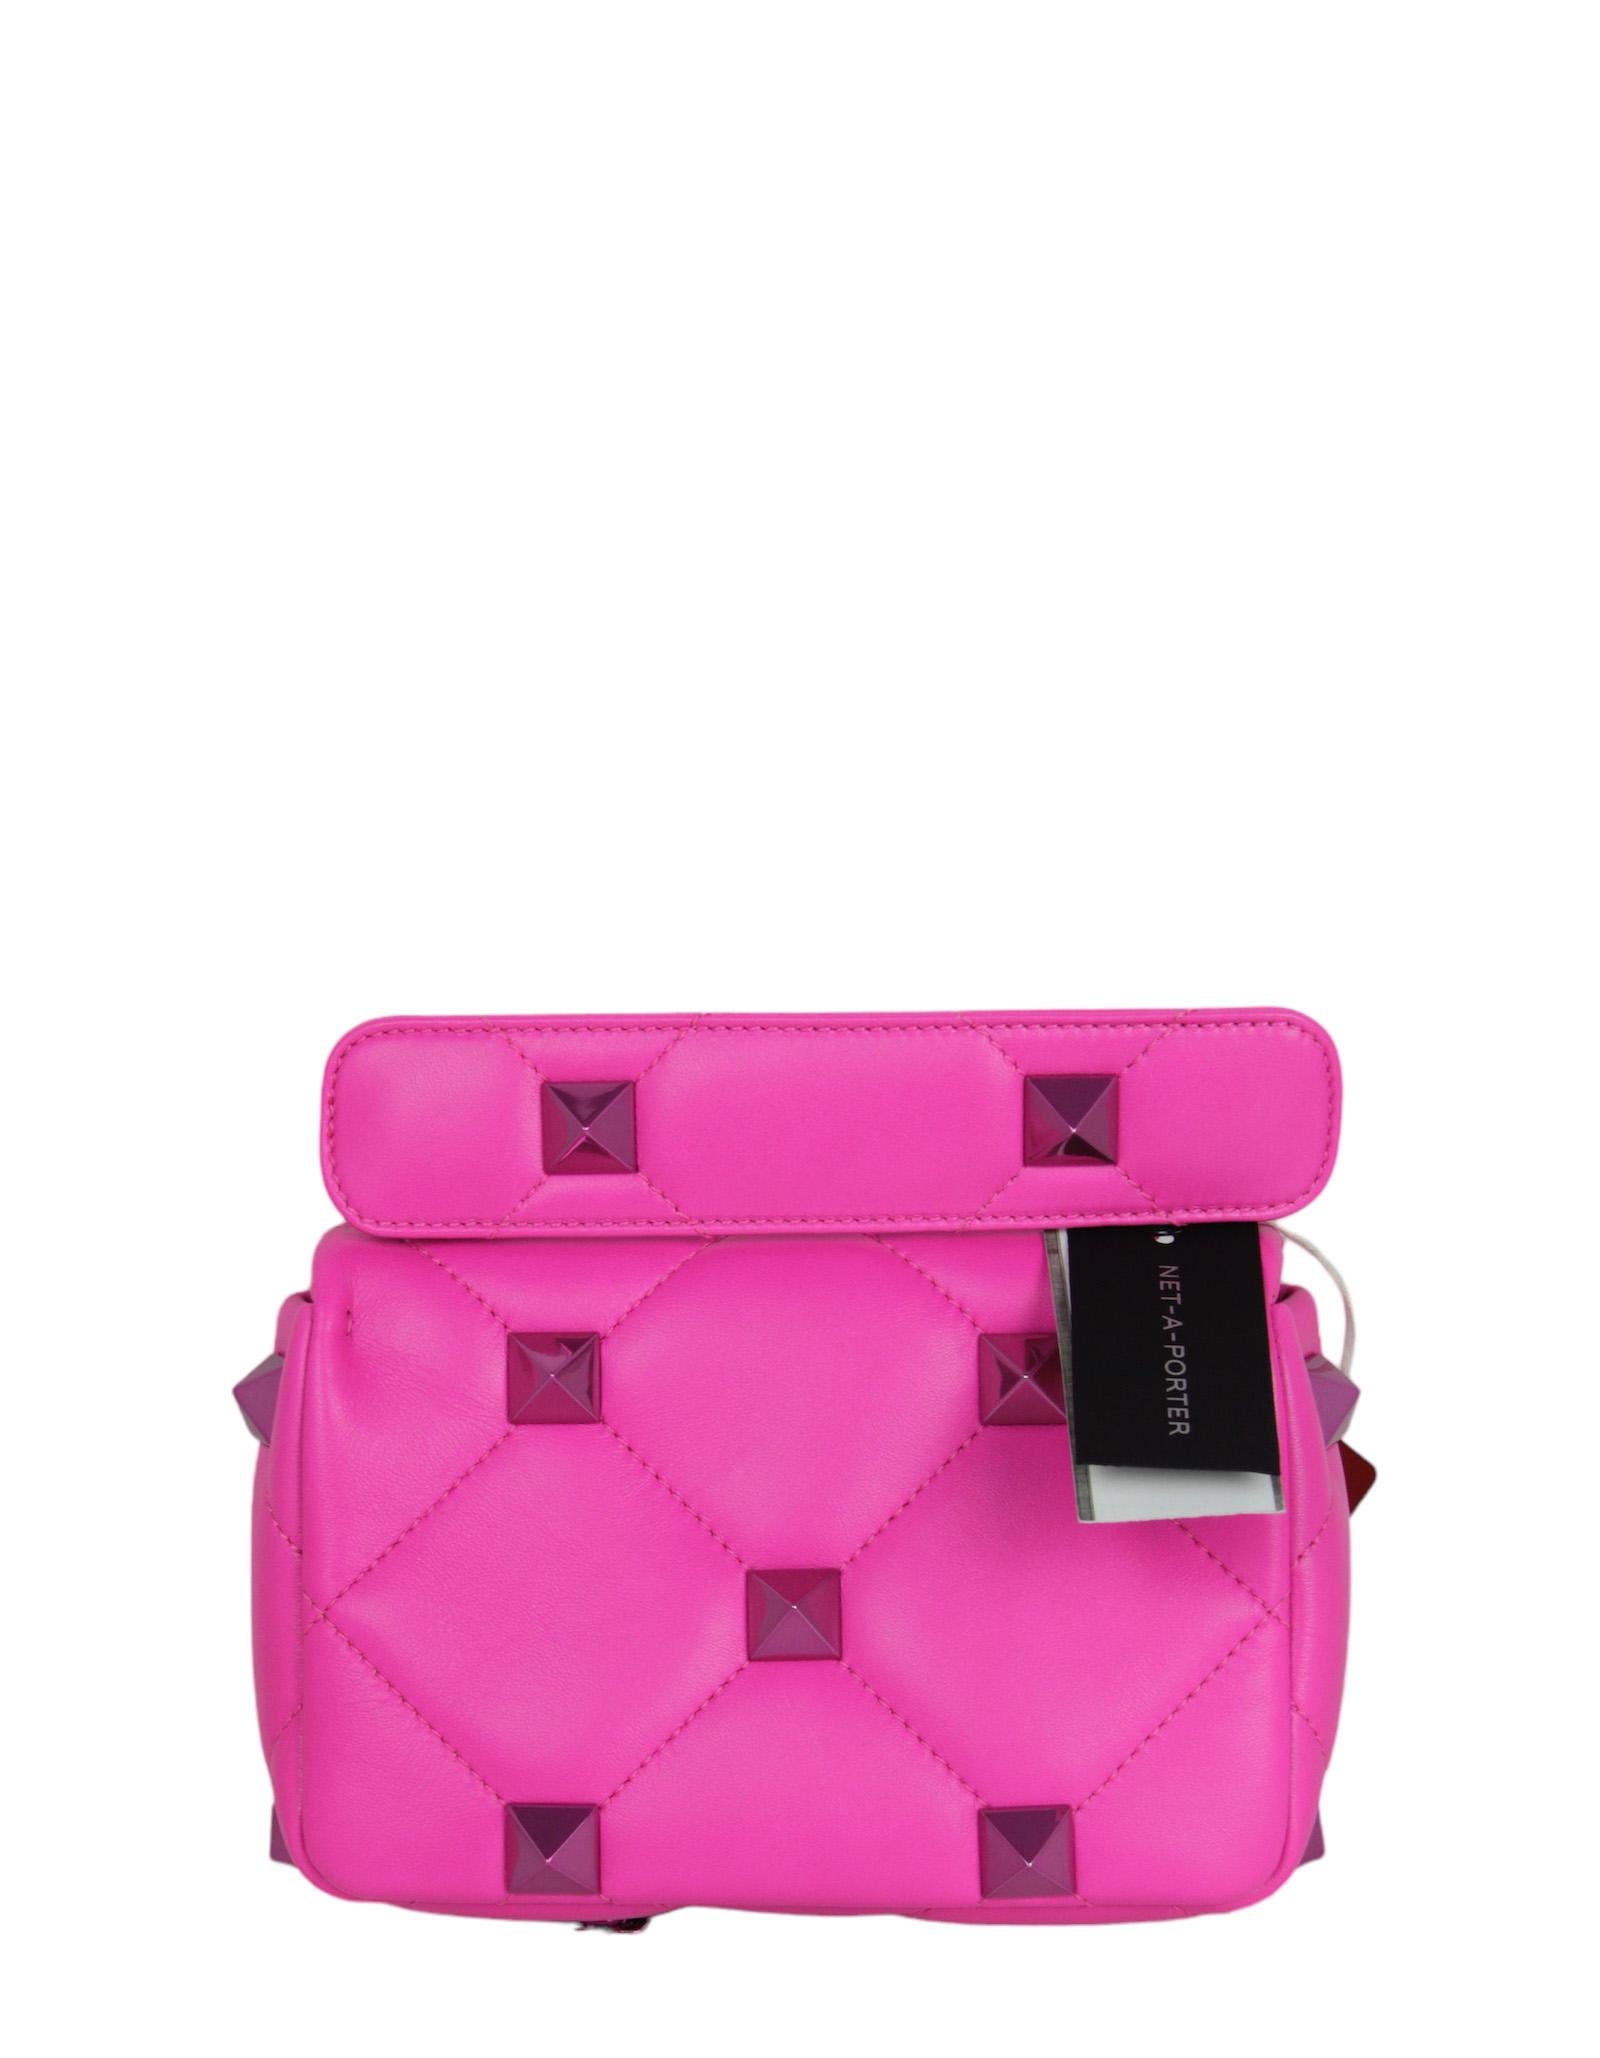 Women's Valentino NEW Pink on Pink Leather Small Roman Studded Flap Bag rt. $3250 For Sale